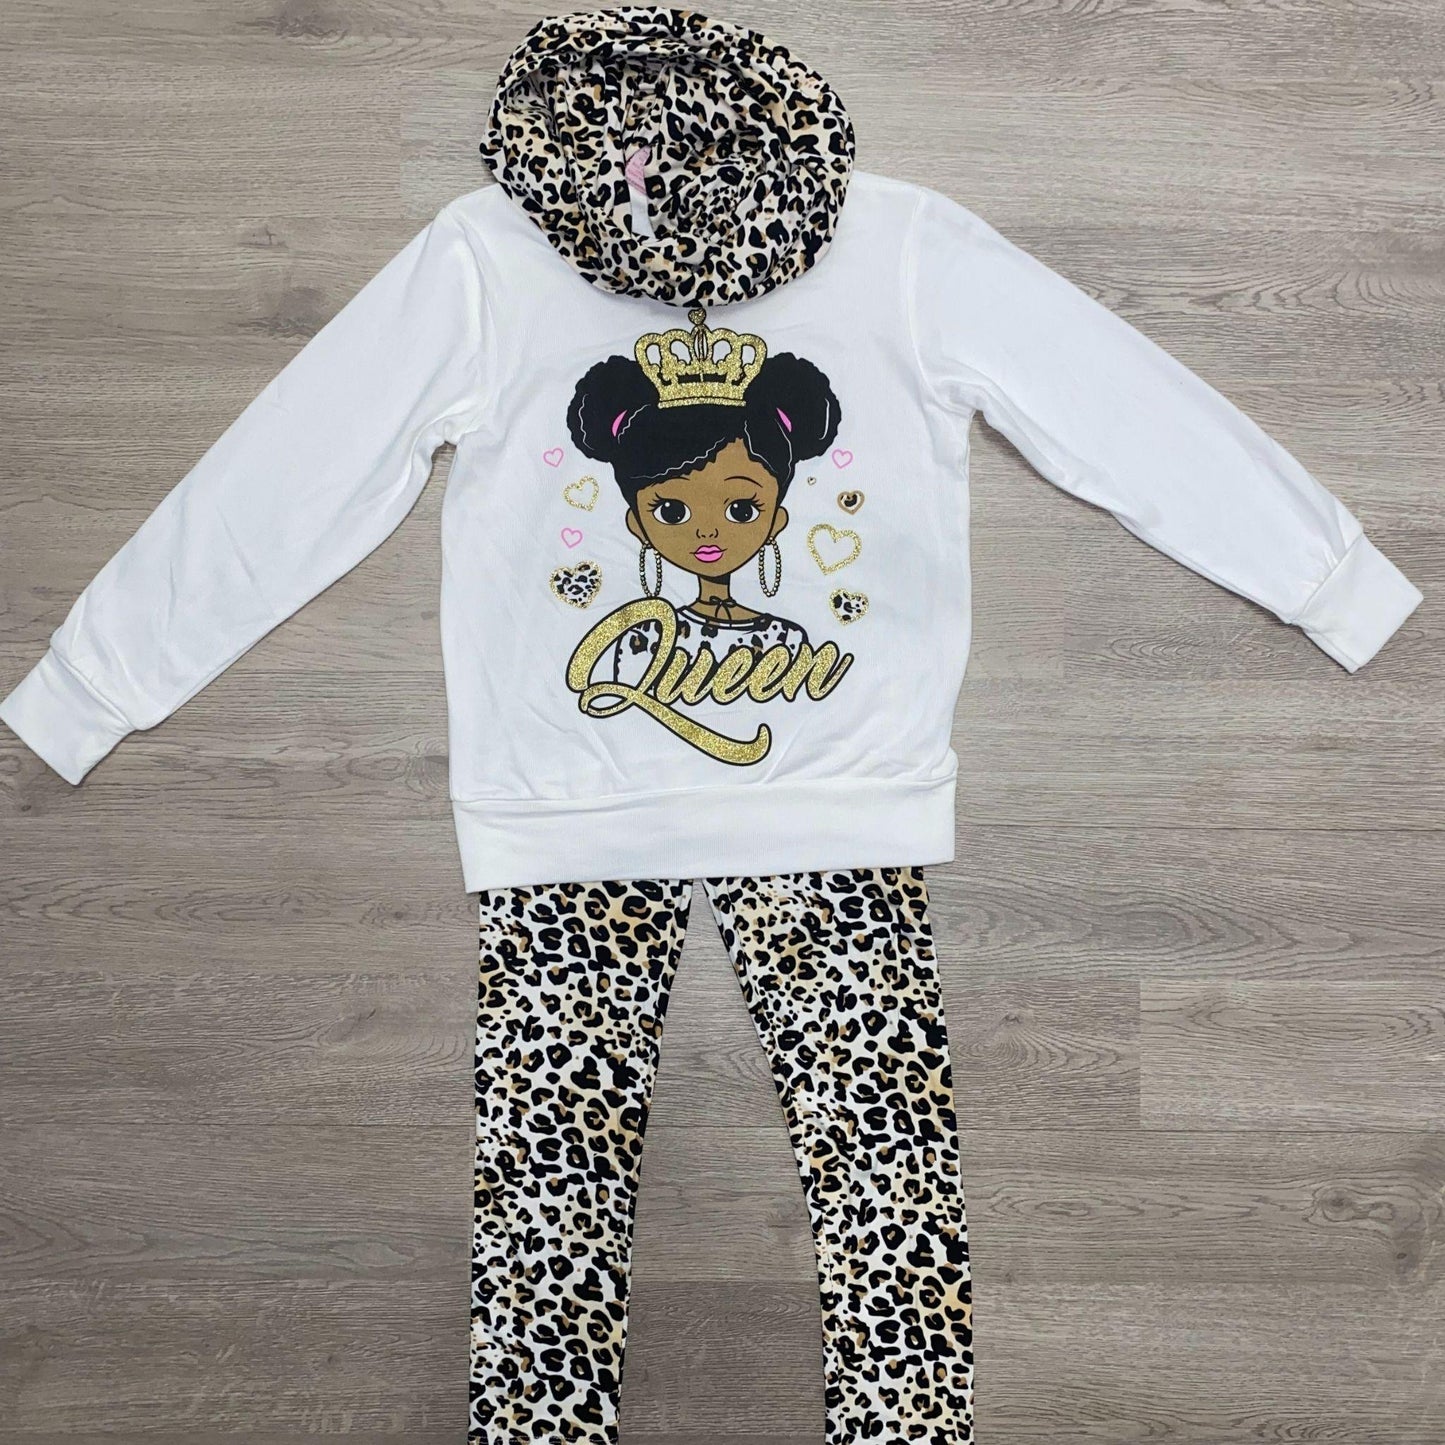 Get ready for fall in this cozy legging set.  This set features an ivory colored top with a screen pressed "Queen" design and cheetah print leggings.  The top also has an attached cheetah print scarf to complete the outfit.